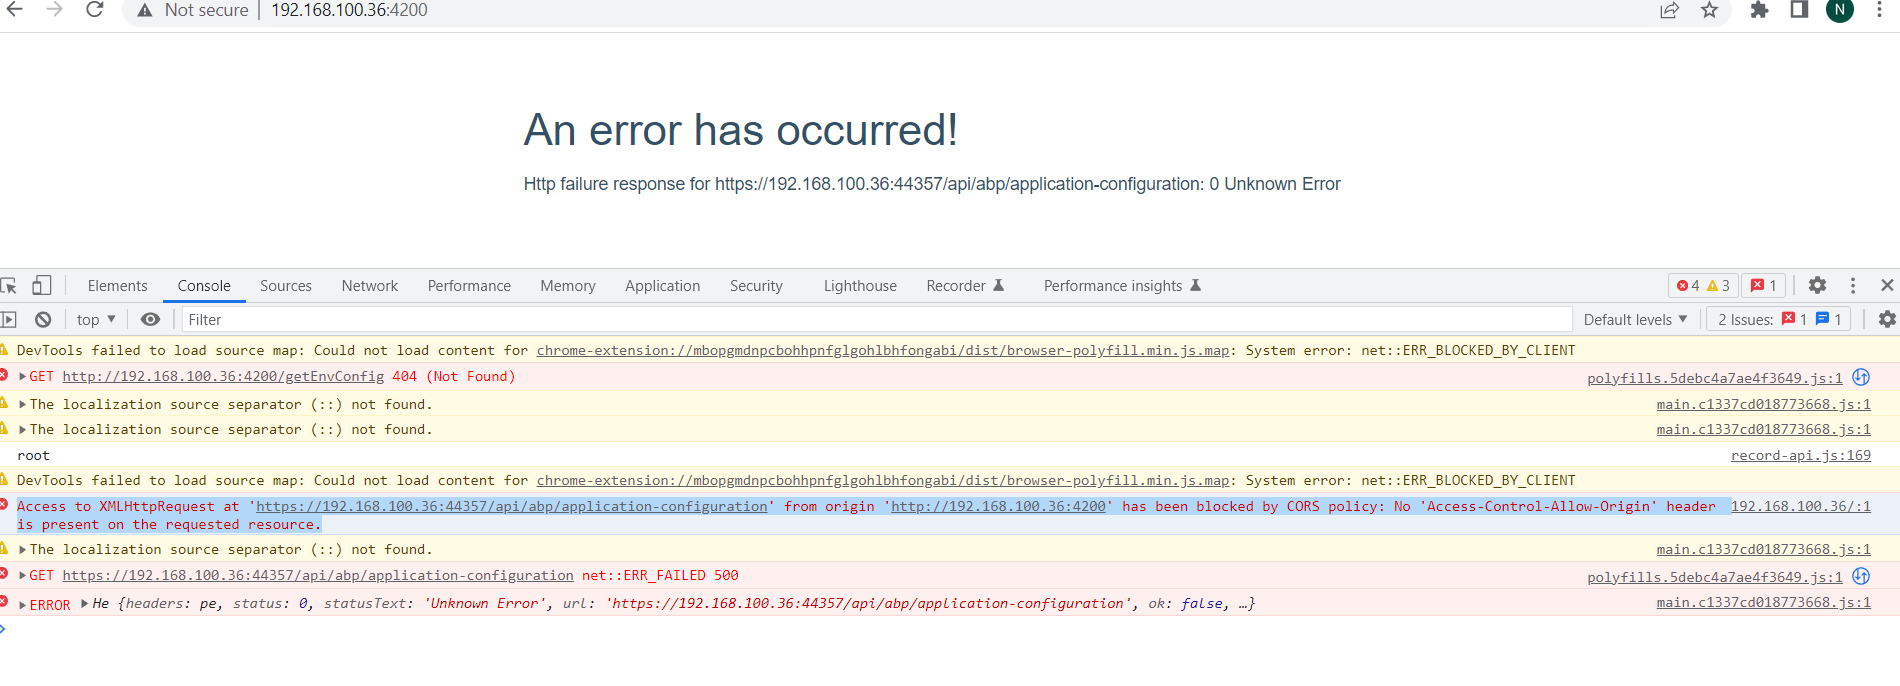 Error login from Angular when deploy to IIS. #4206 | Support Center